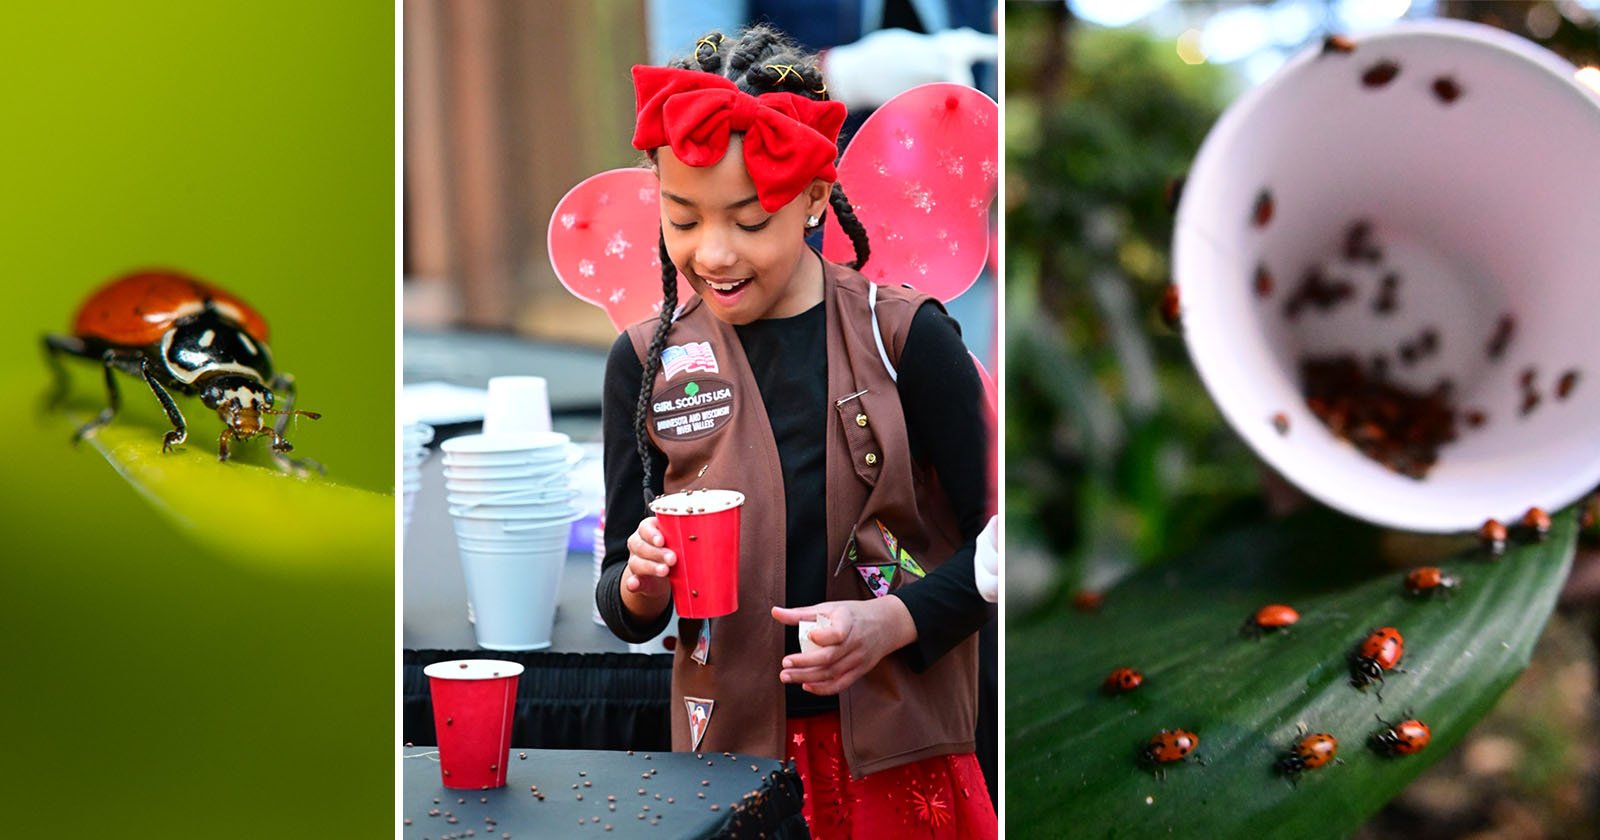 A triptych of images: on the left, a close-up of a vibrant ladybug on a green leaf; in the center, a young girl in a scout uniform pouring a drink; on the right, a white cup with several ladybugs inside.